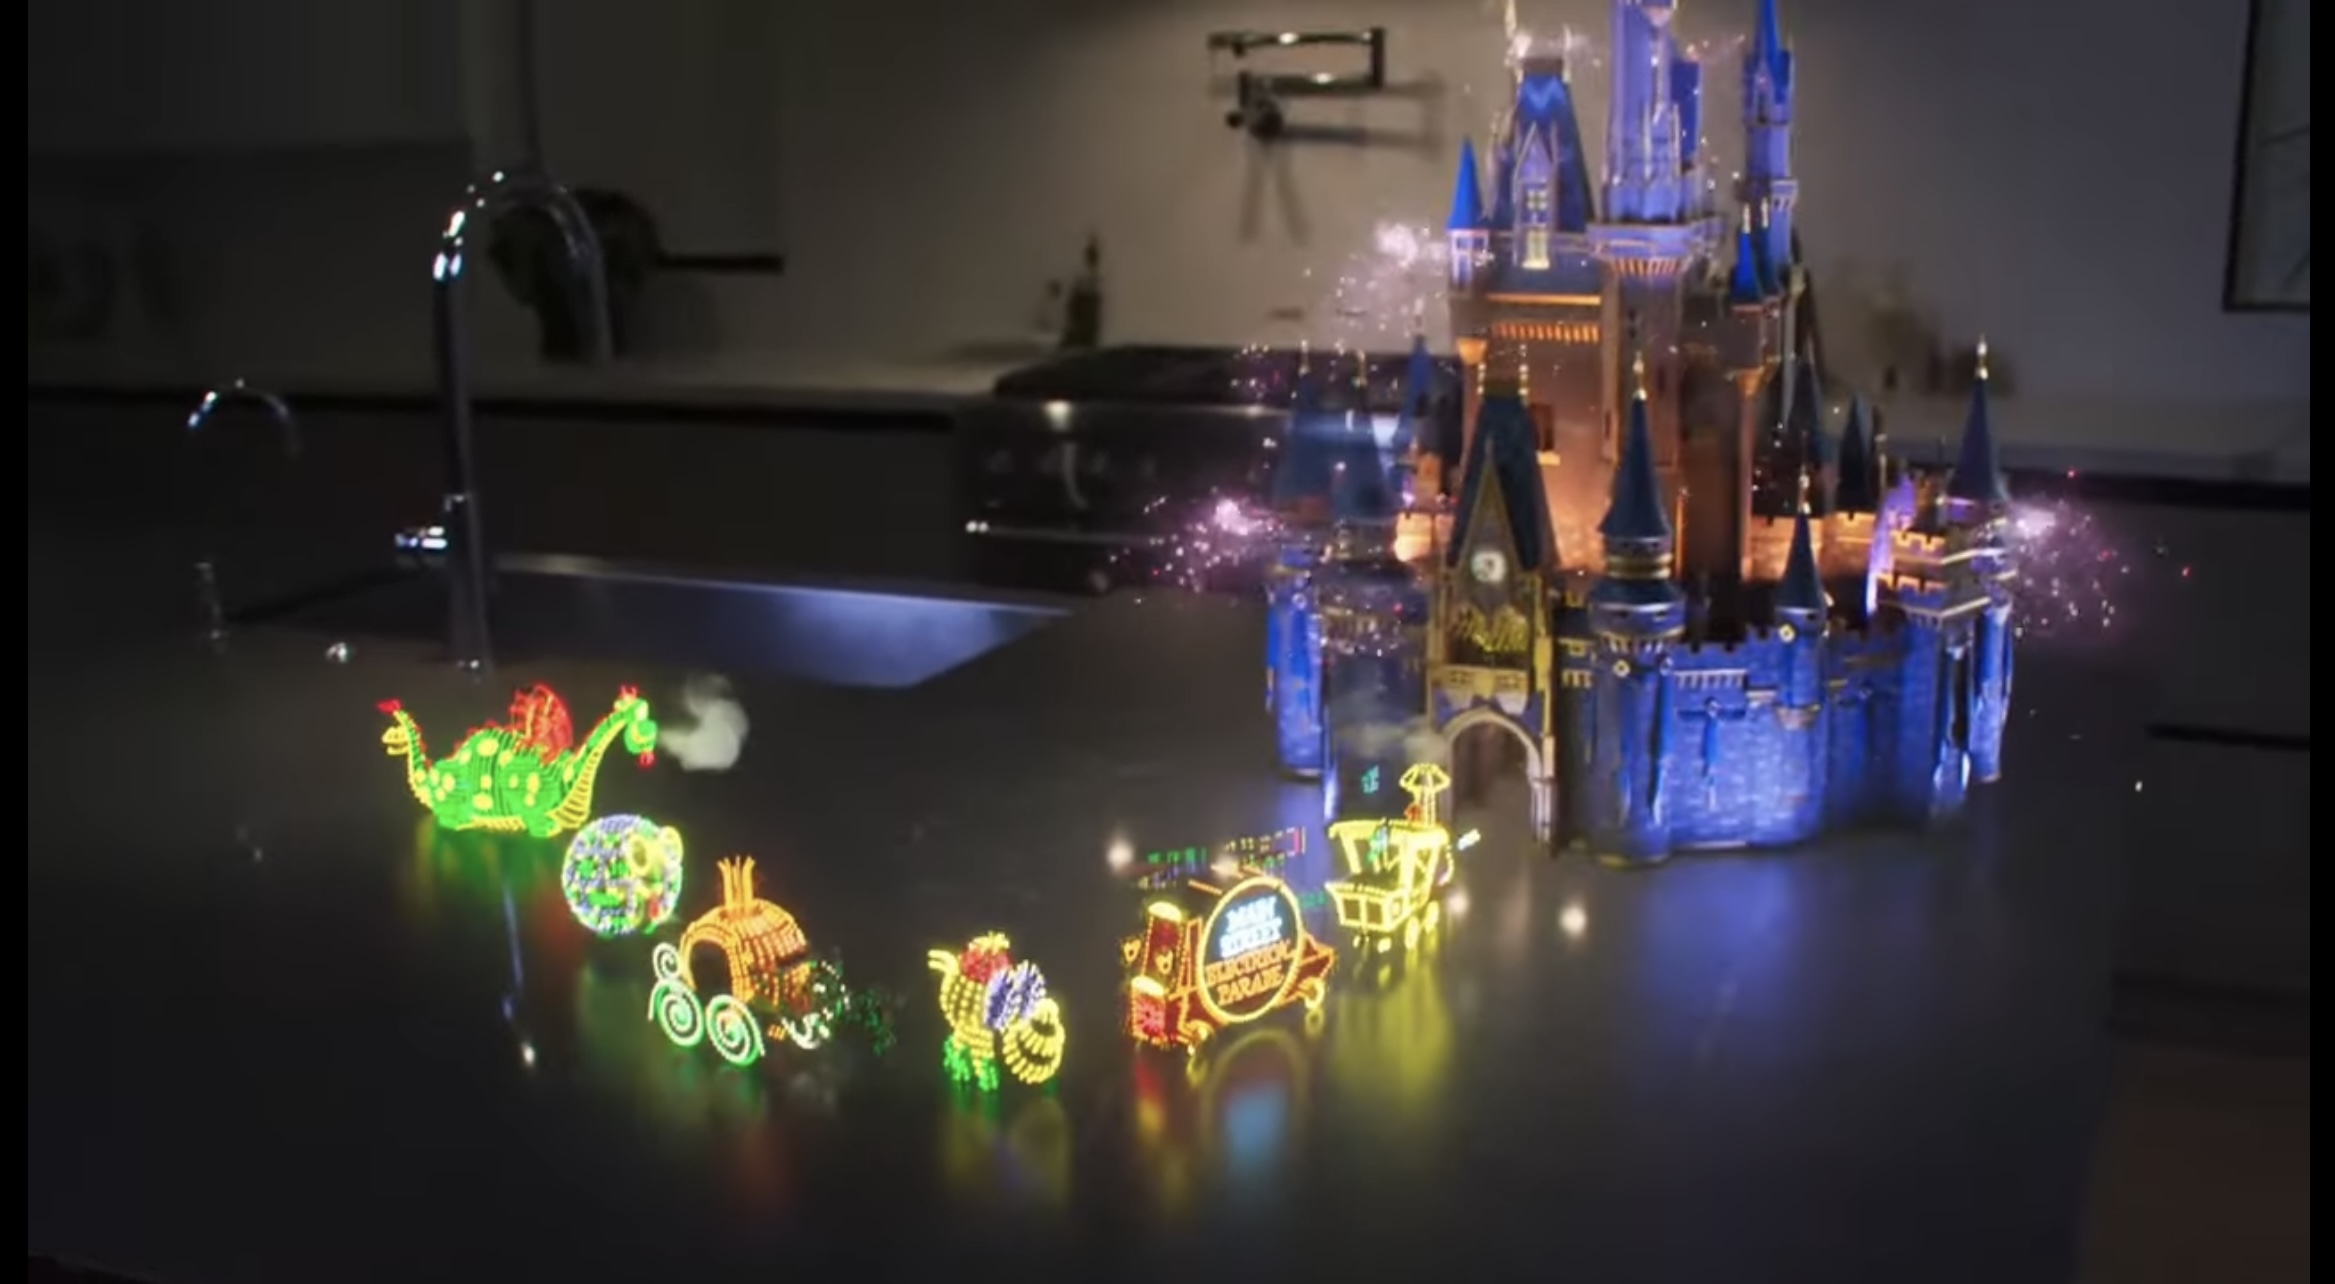 The Apple Vision Pro brings Walt Disney World to your kitchen table